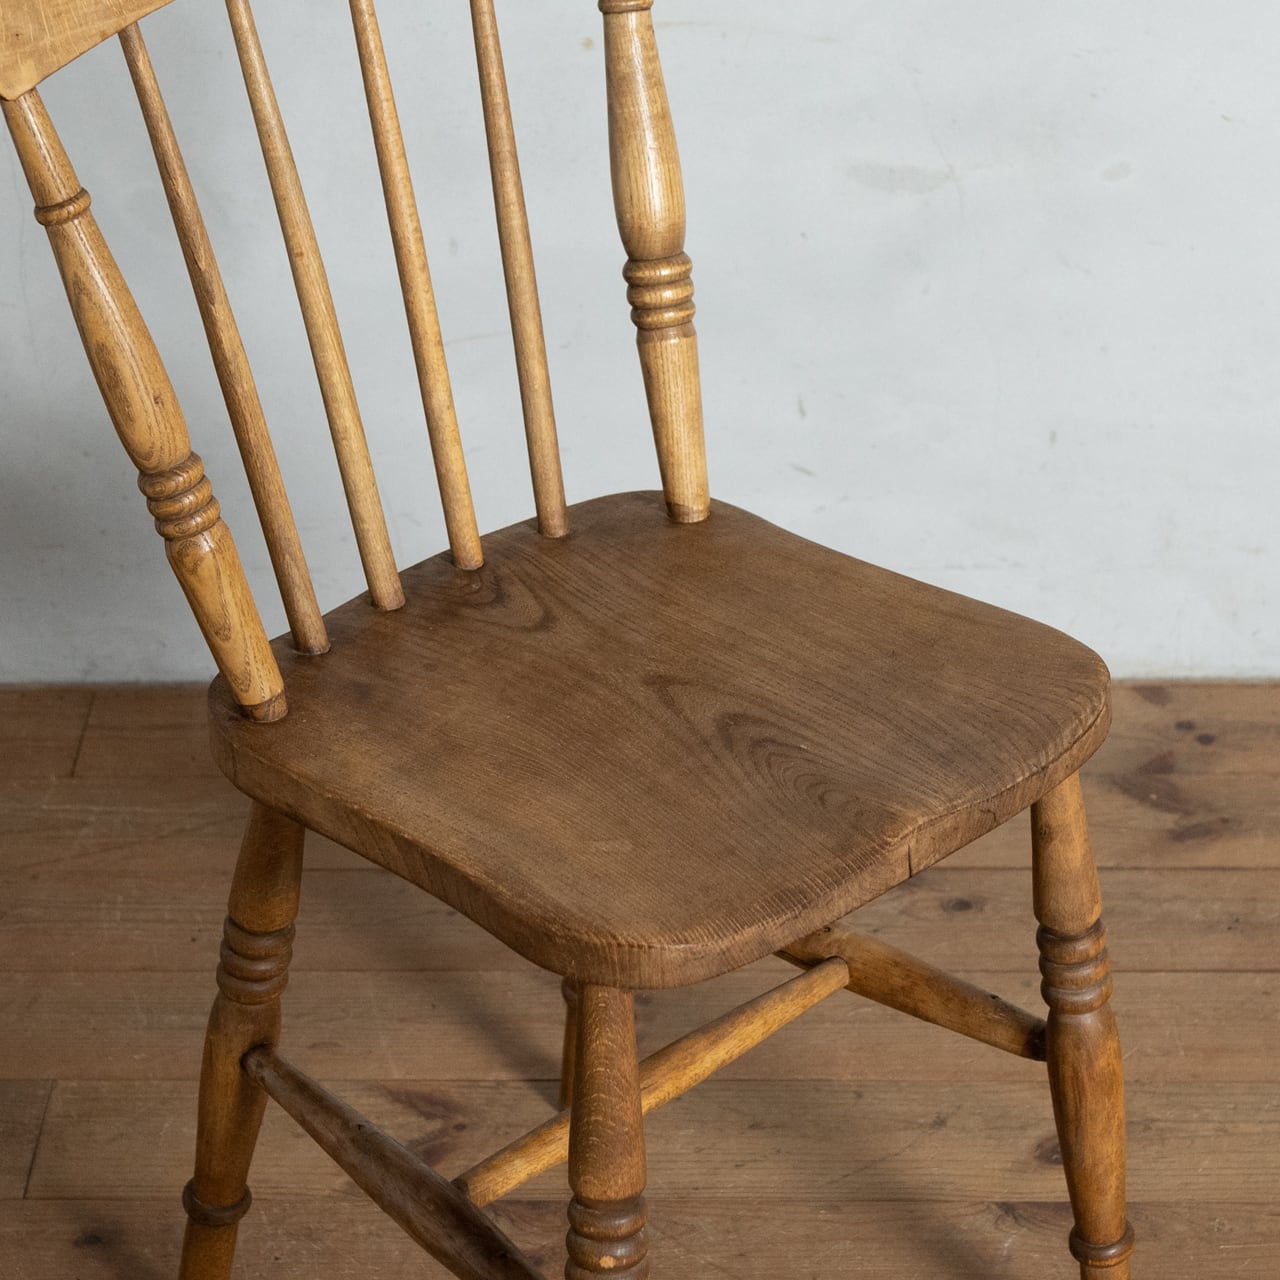 Kitchen Chair / キッチン チェアB〈ダイニングチェア・ウィンザーチェア・デスクチェア・椅子・カントリー〉     SHABBY'S MARKETPLACE　アンティーク・ヴィンテージ 家具や雑貨のお店 powered by BASE